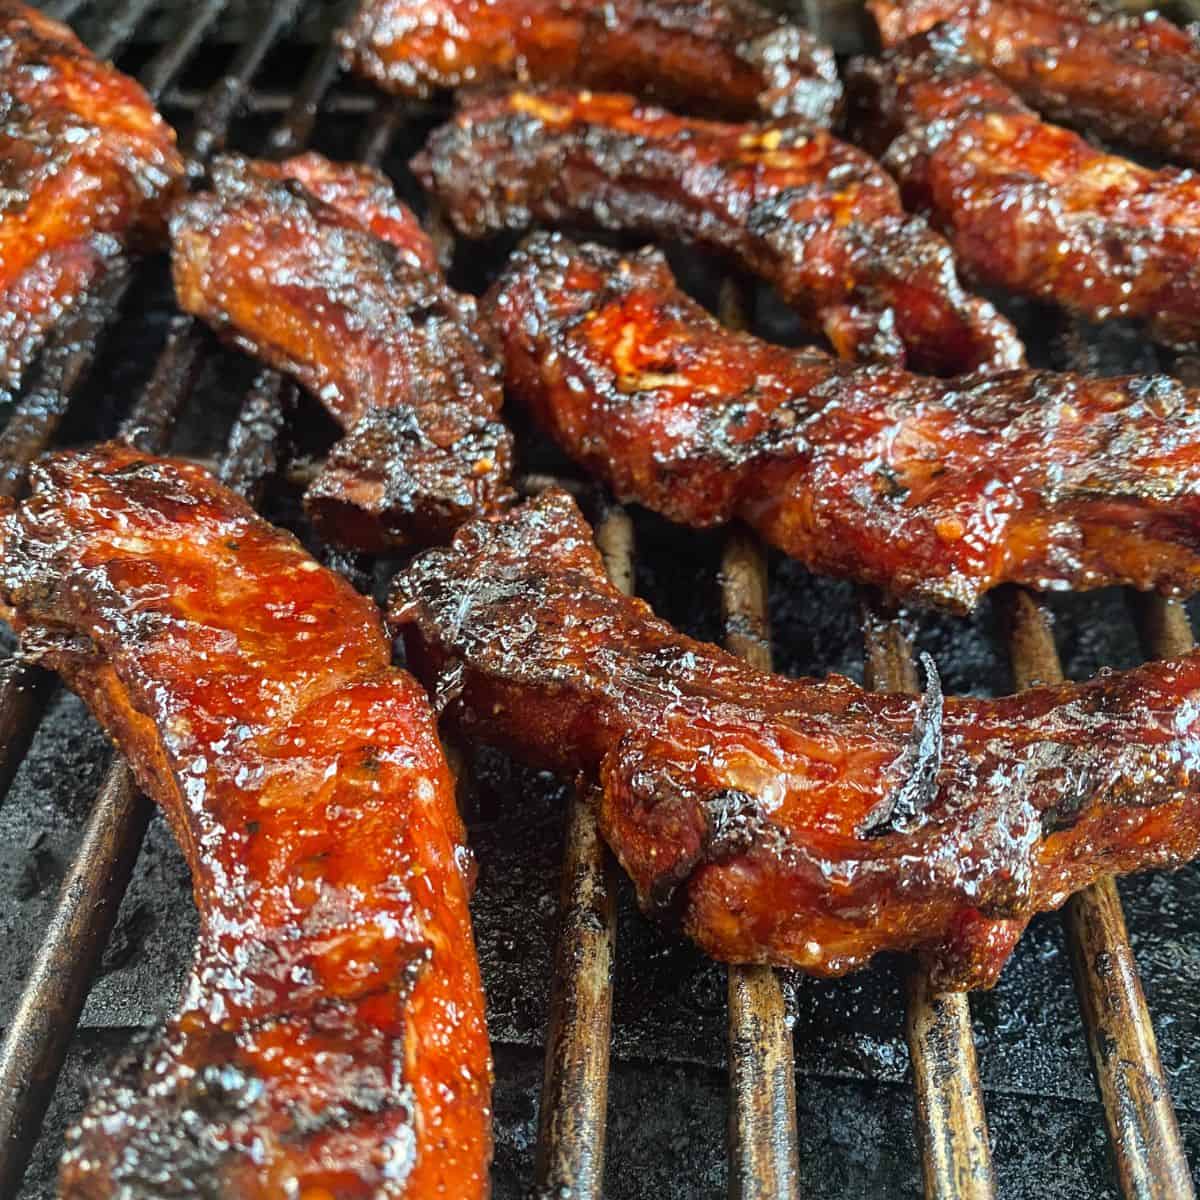 Individual Ribs, Glazed and resting on a grill grate